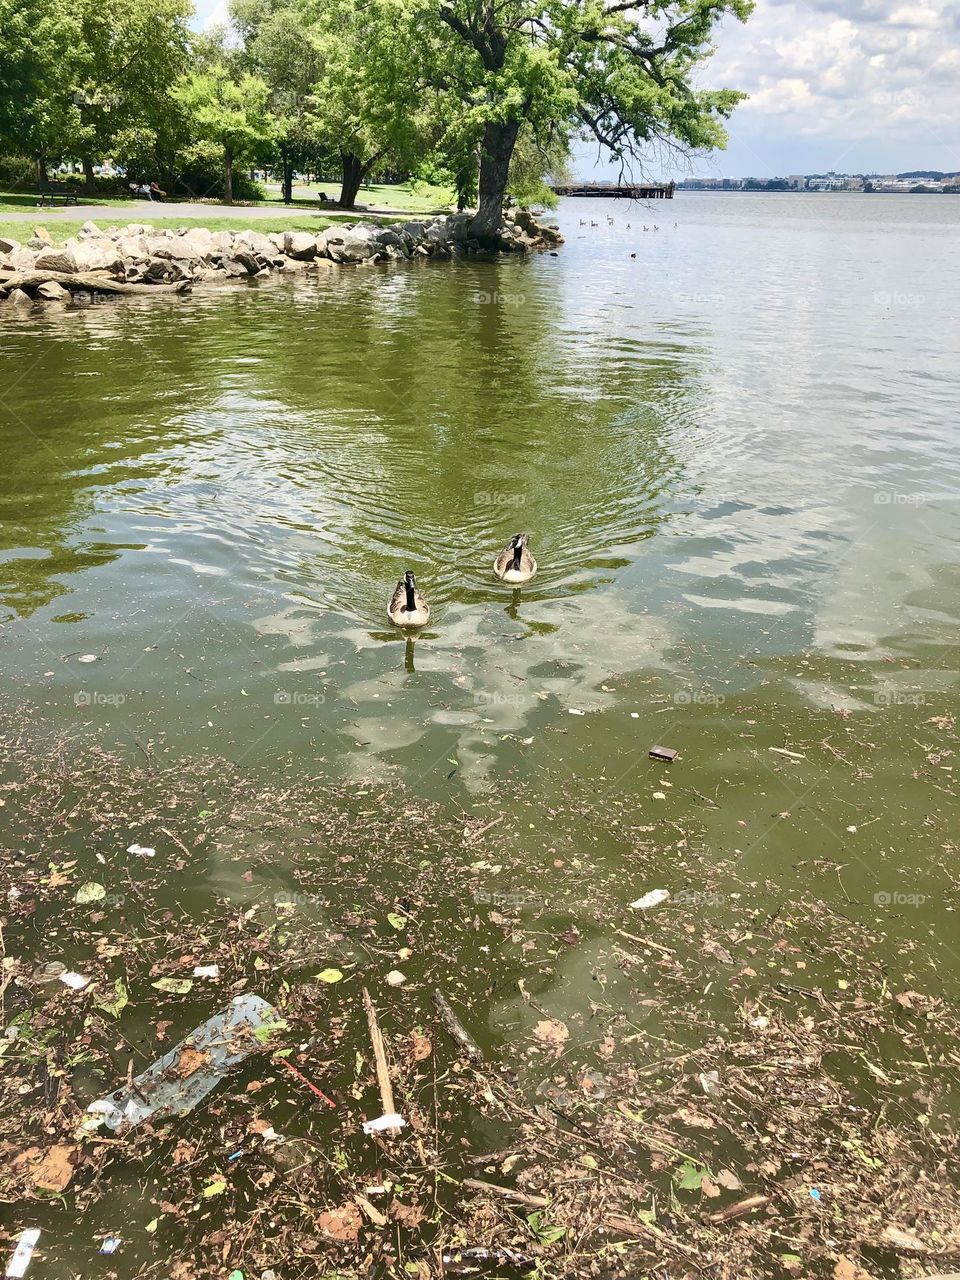 Old Town Akexandria water front / Ducks in the water 💦 🦆